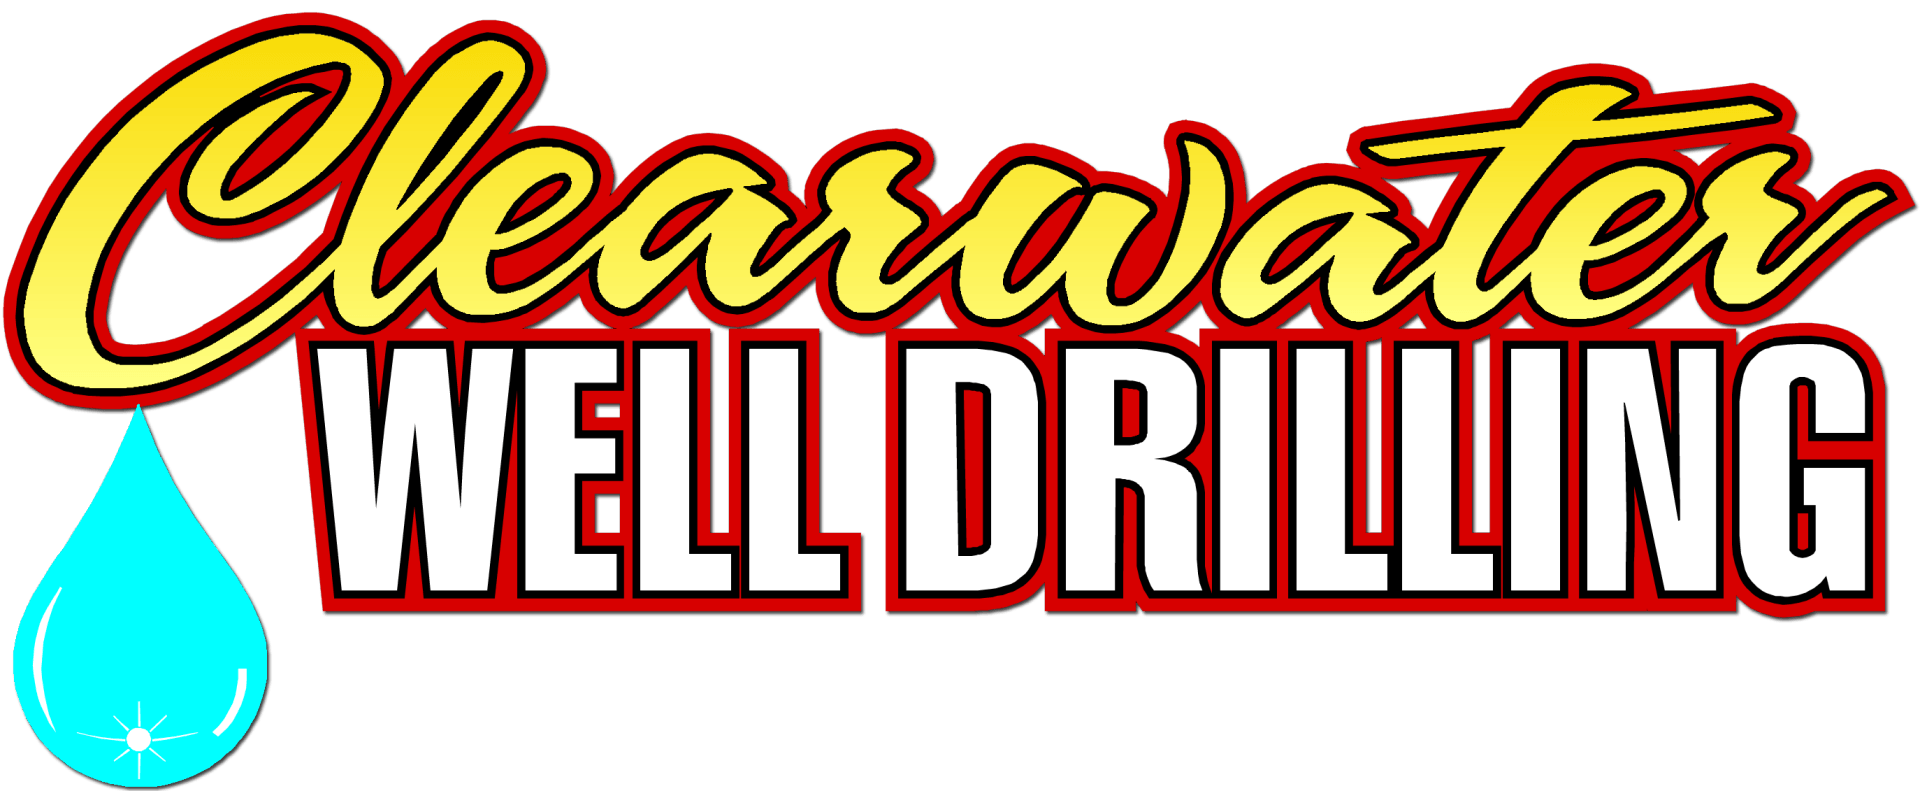 Clearwater Well Drilling, Inc.